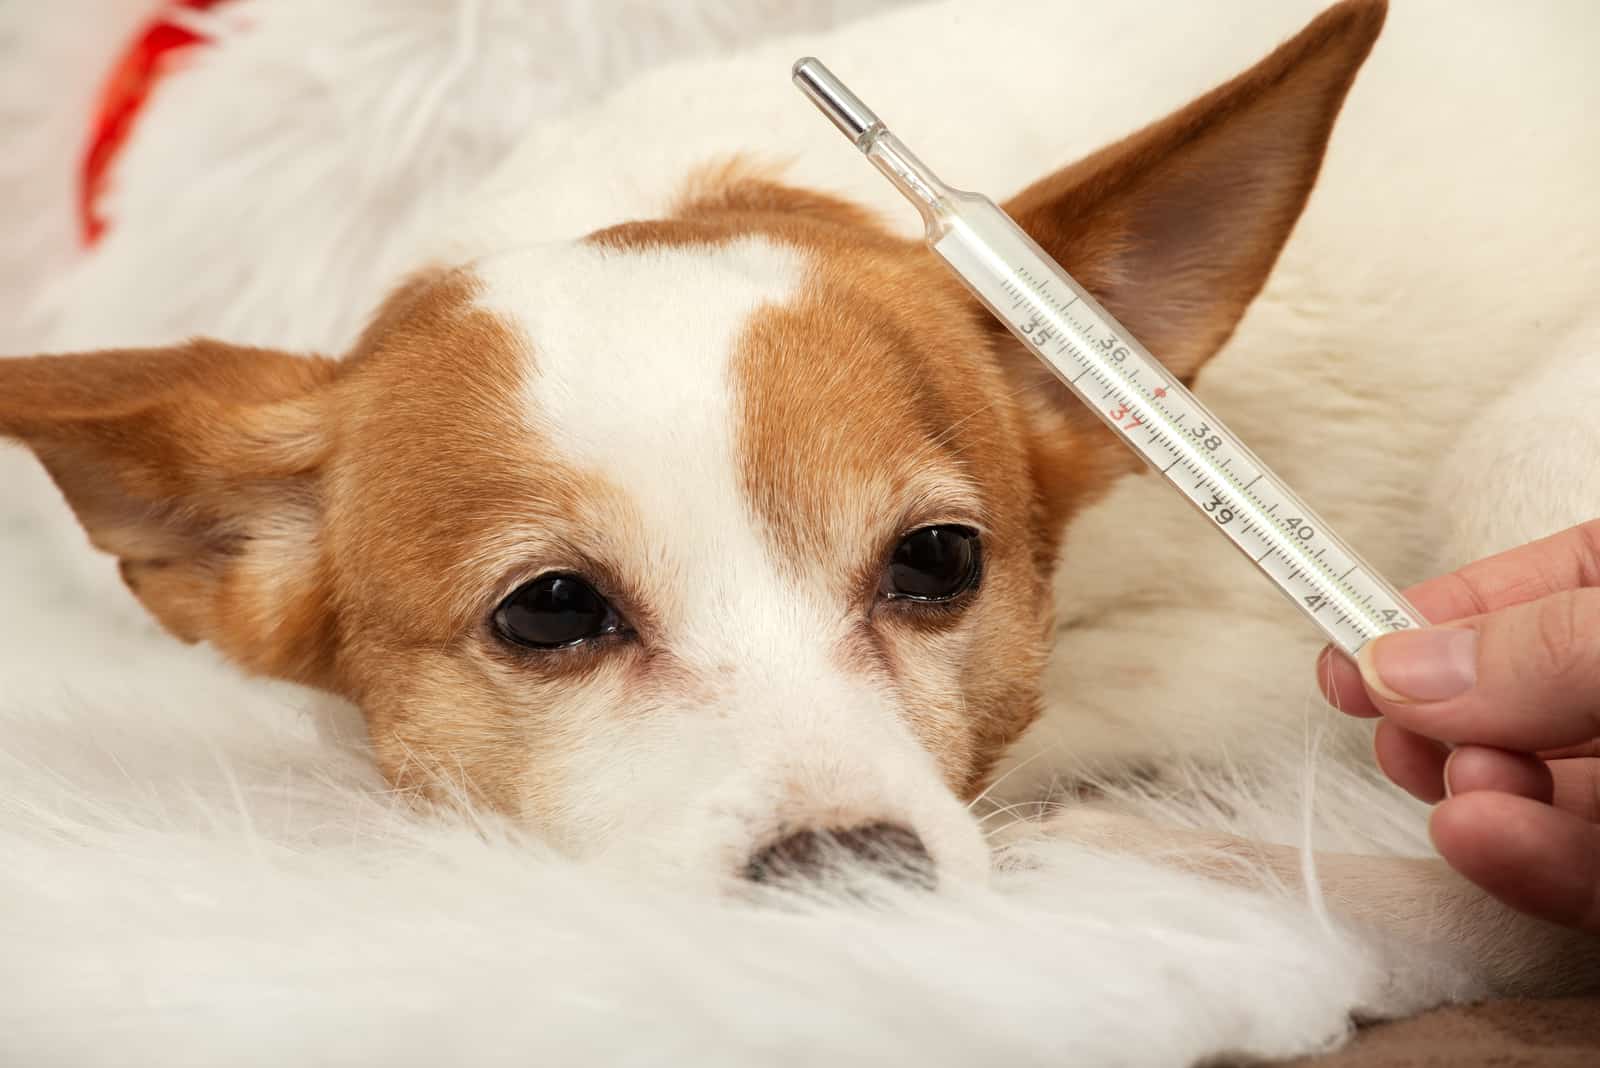 owner checking dogs temperature